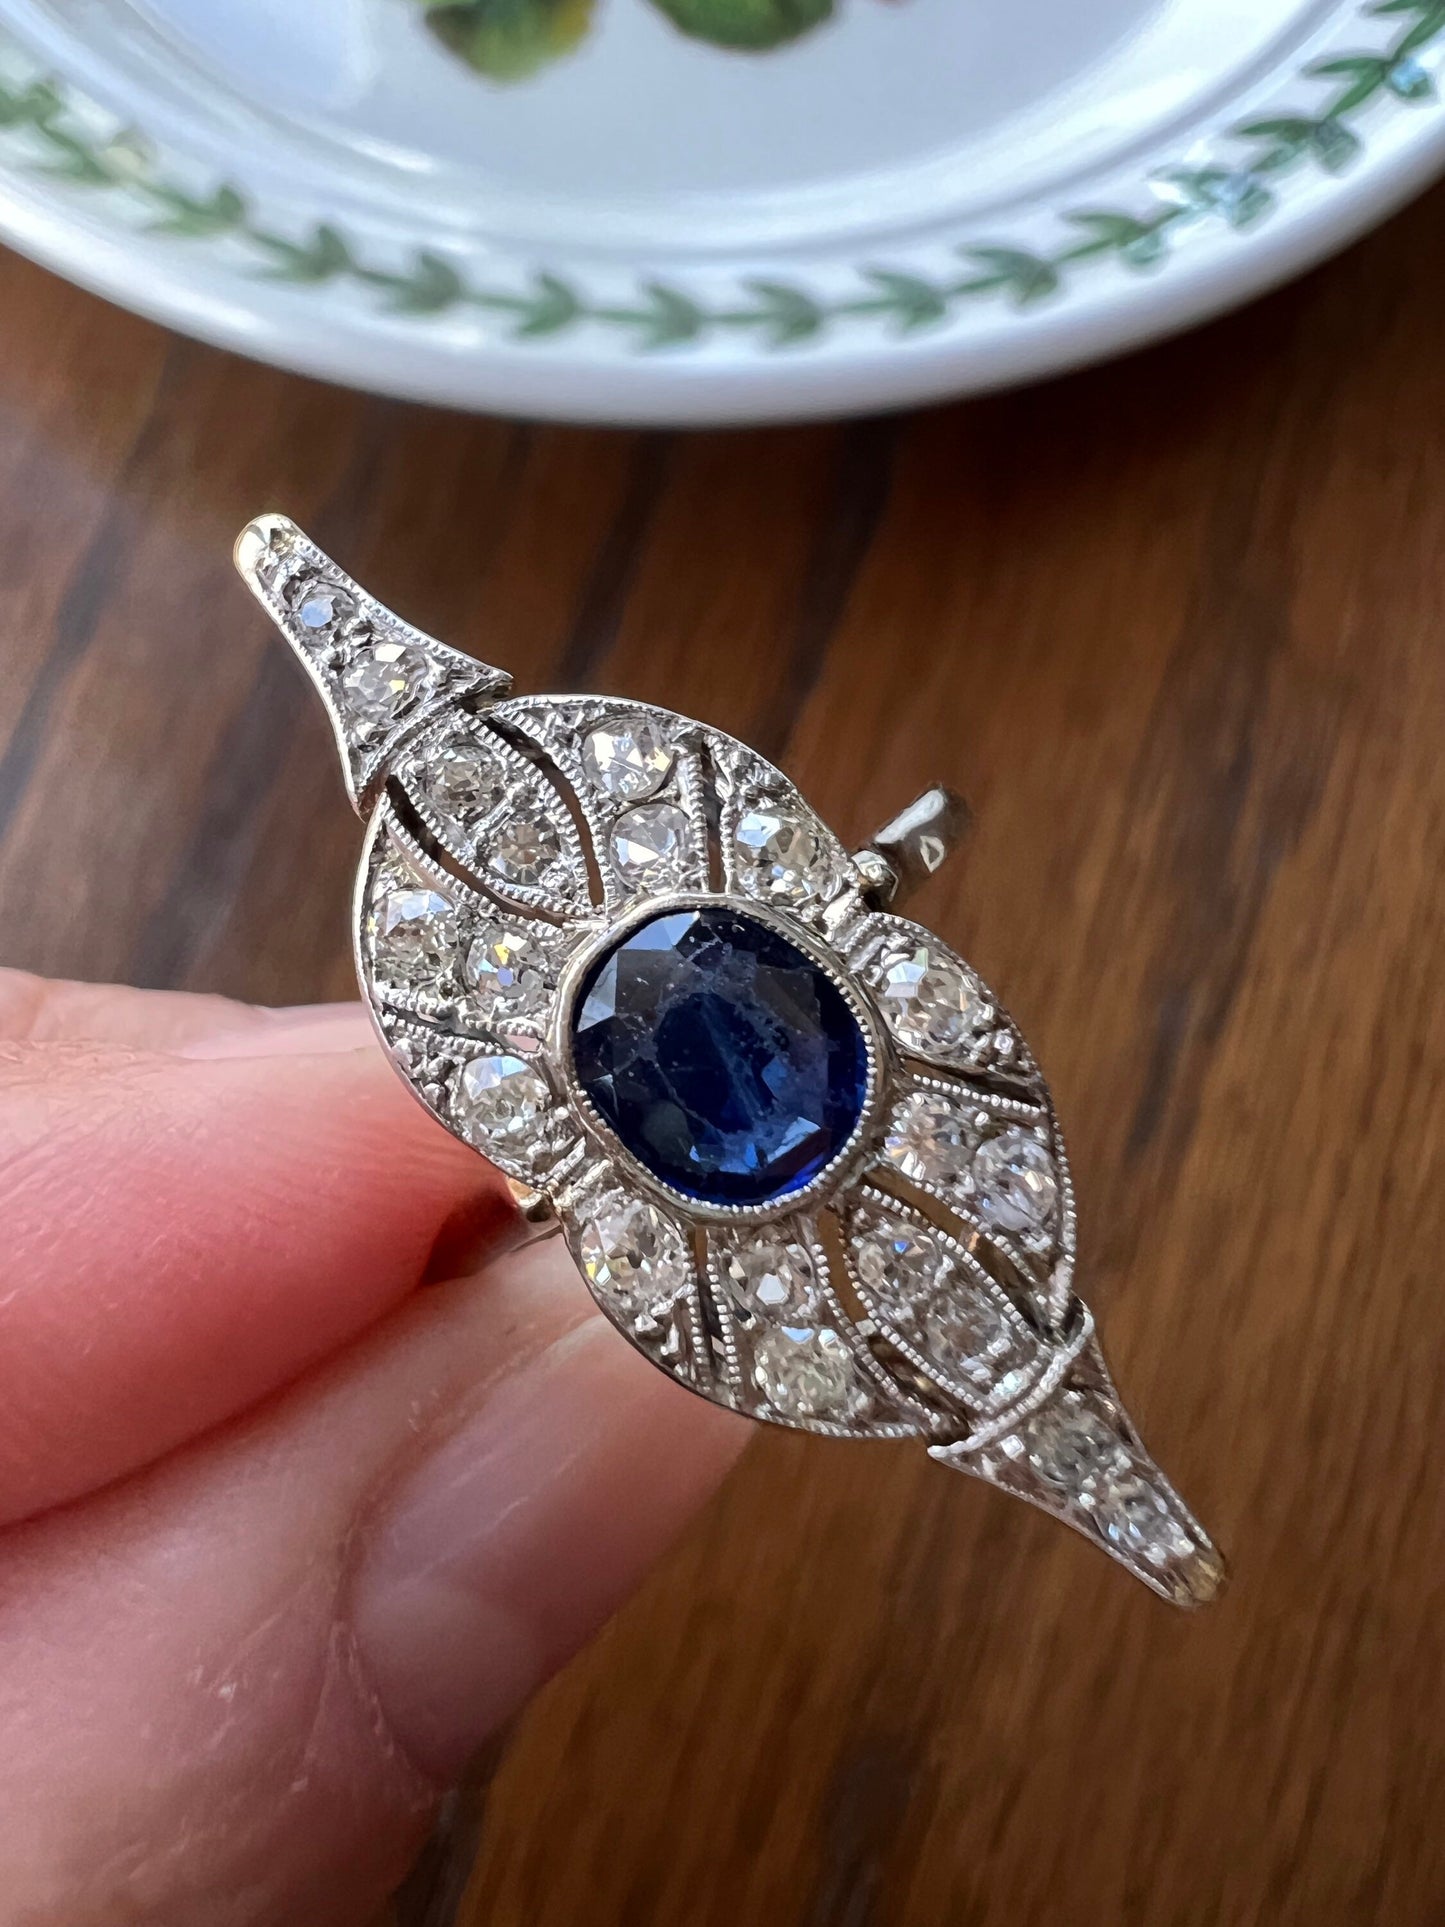 LARGE Antique SAPPHIRE 20 Old Mine Rose Cut DIAMONDS 18k White Gold Statement Ring SWiRL Unique Gift Belle Epoque Dramatic Cocktail 1.25Inch